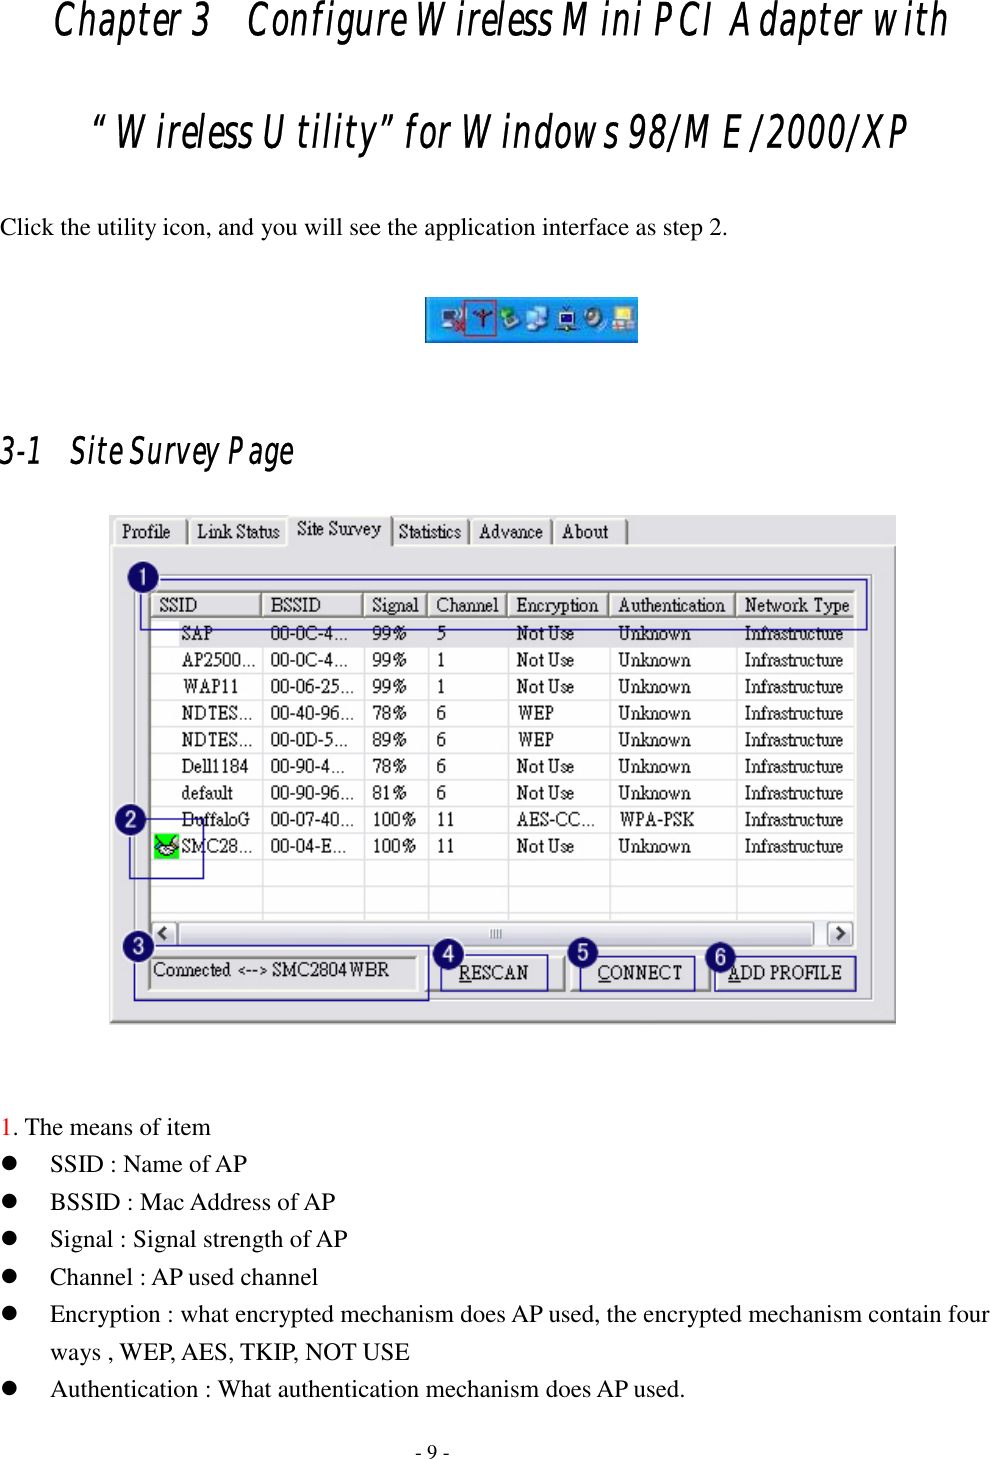    - 9 - Chapter 3   Configure Wireless Mini PCI Adapter with   “ Wireless Utility” for Windows 98/ME/2000/XP Click the utility icon, and you will see the application interface as step 2.      3-1   Site Survey Page    1. The means of item z SSID : Name of AP z BSSID : Mac Address of AP z Signal : Signal strength of AP z Channel : AP used channel z Encryption : what encrypted mechanism does AP used, the encrypted mechanism contain four ways , WEP, AES, TKIP, NOT USE z Authentication : What authentication mechanism does AP used. 